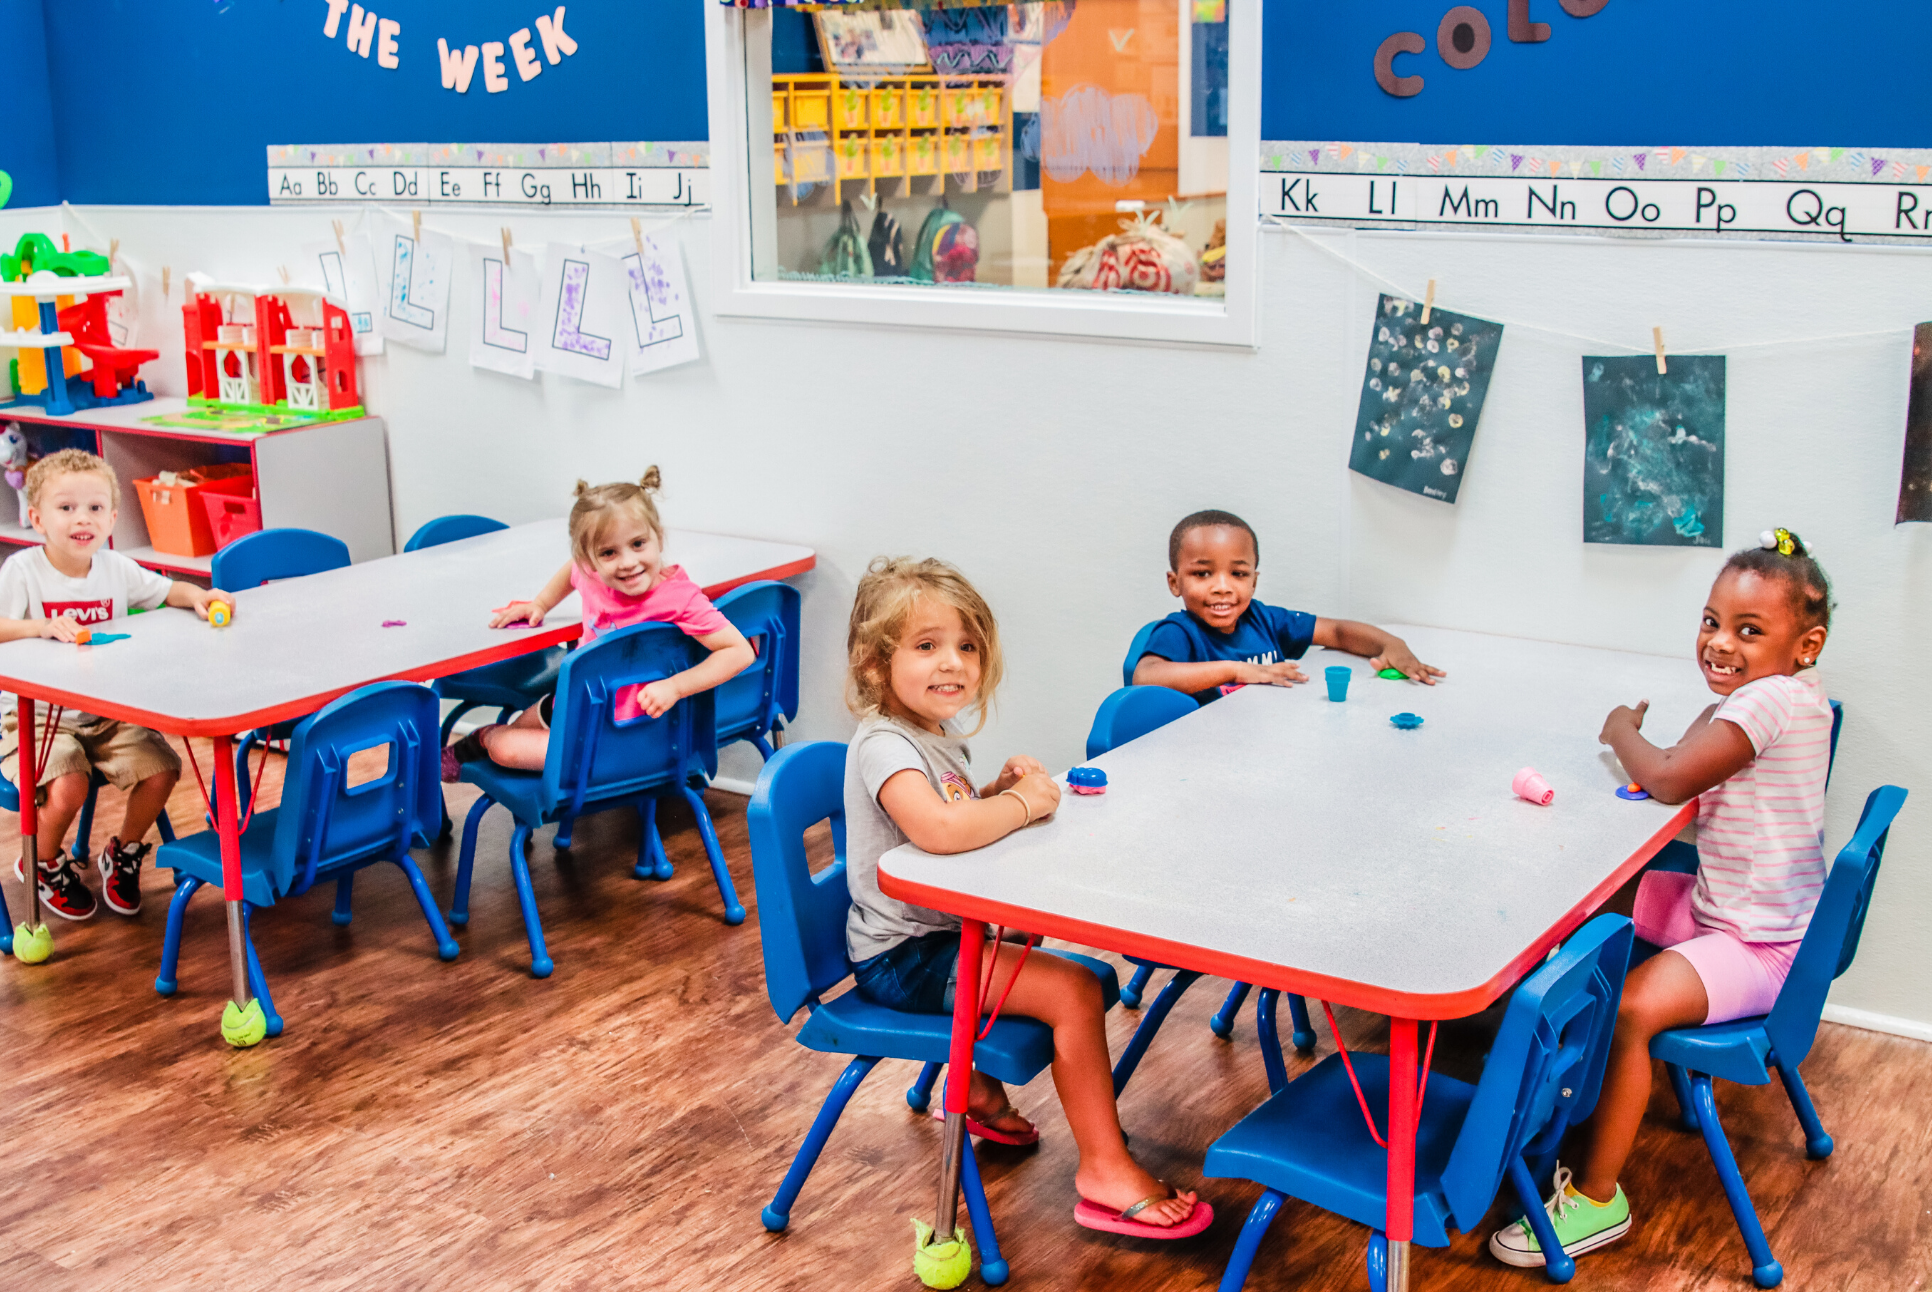 Let's Celebrate Kindergarten - Just One of the Few Programs Our Centers Offer